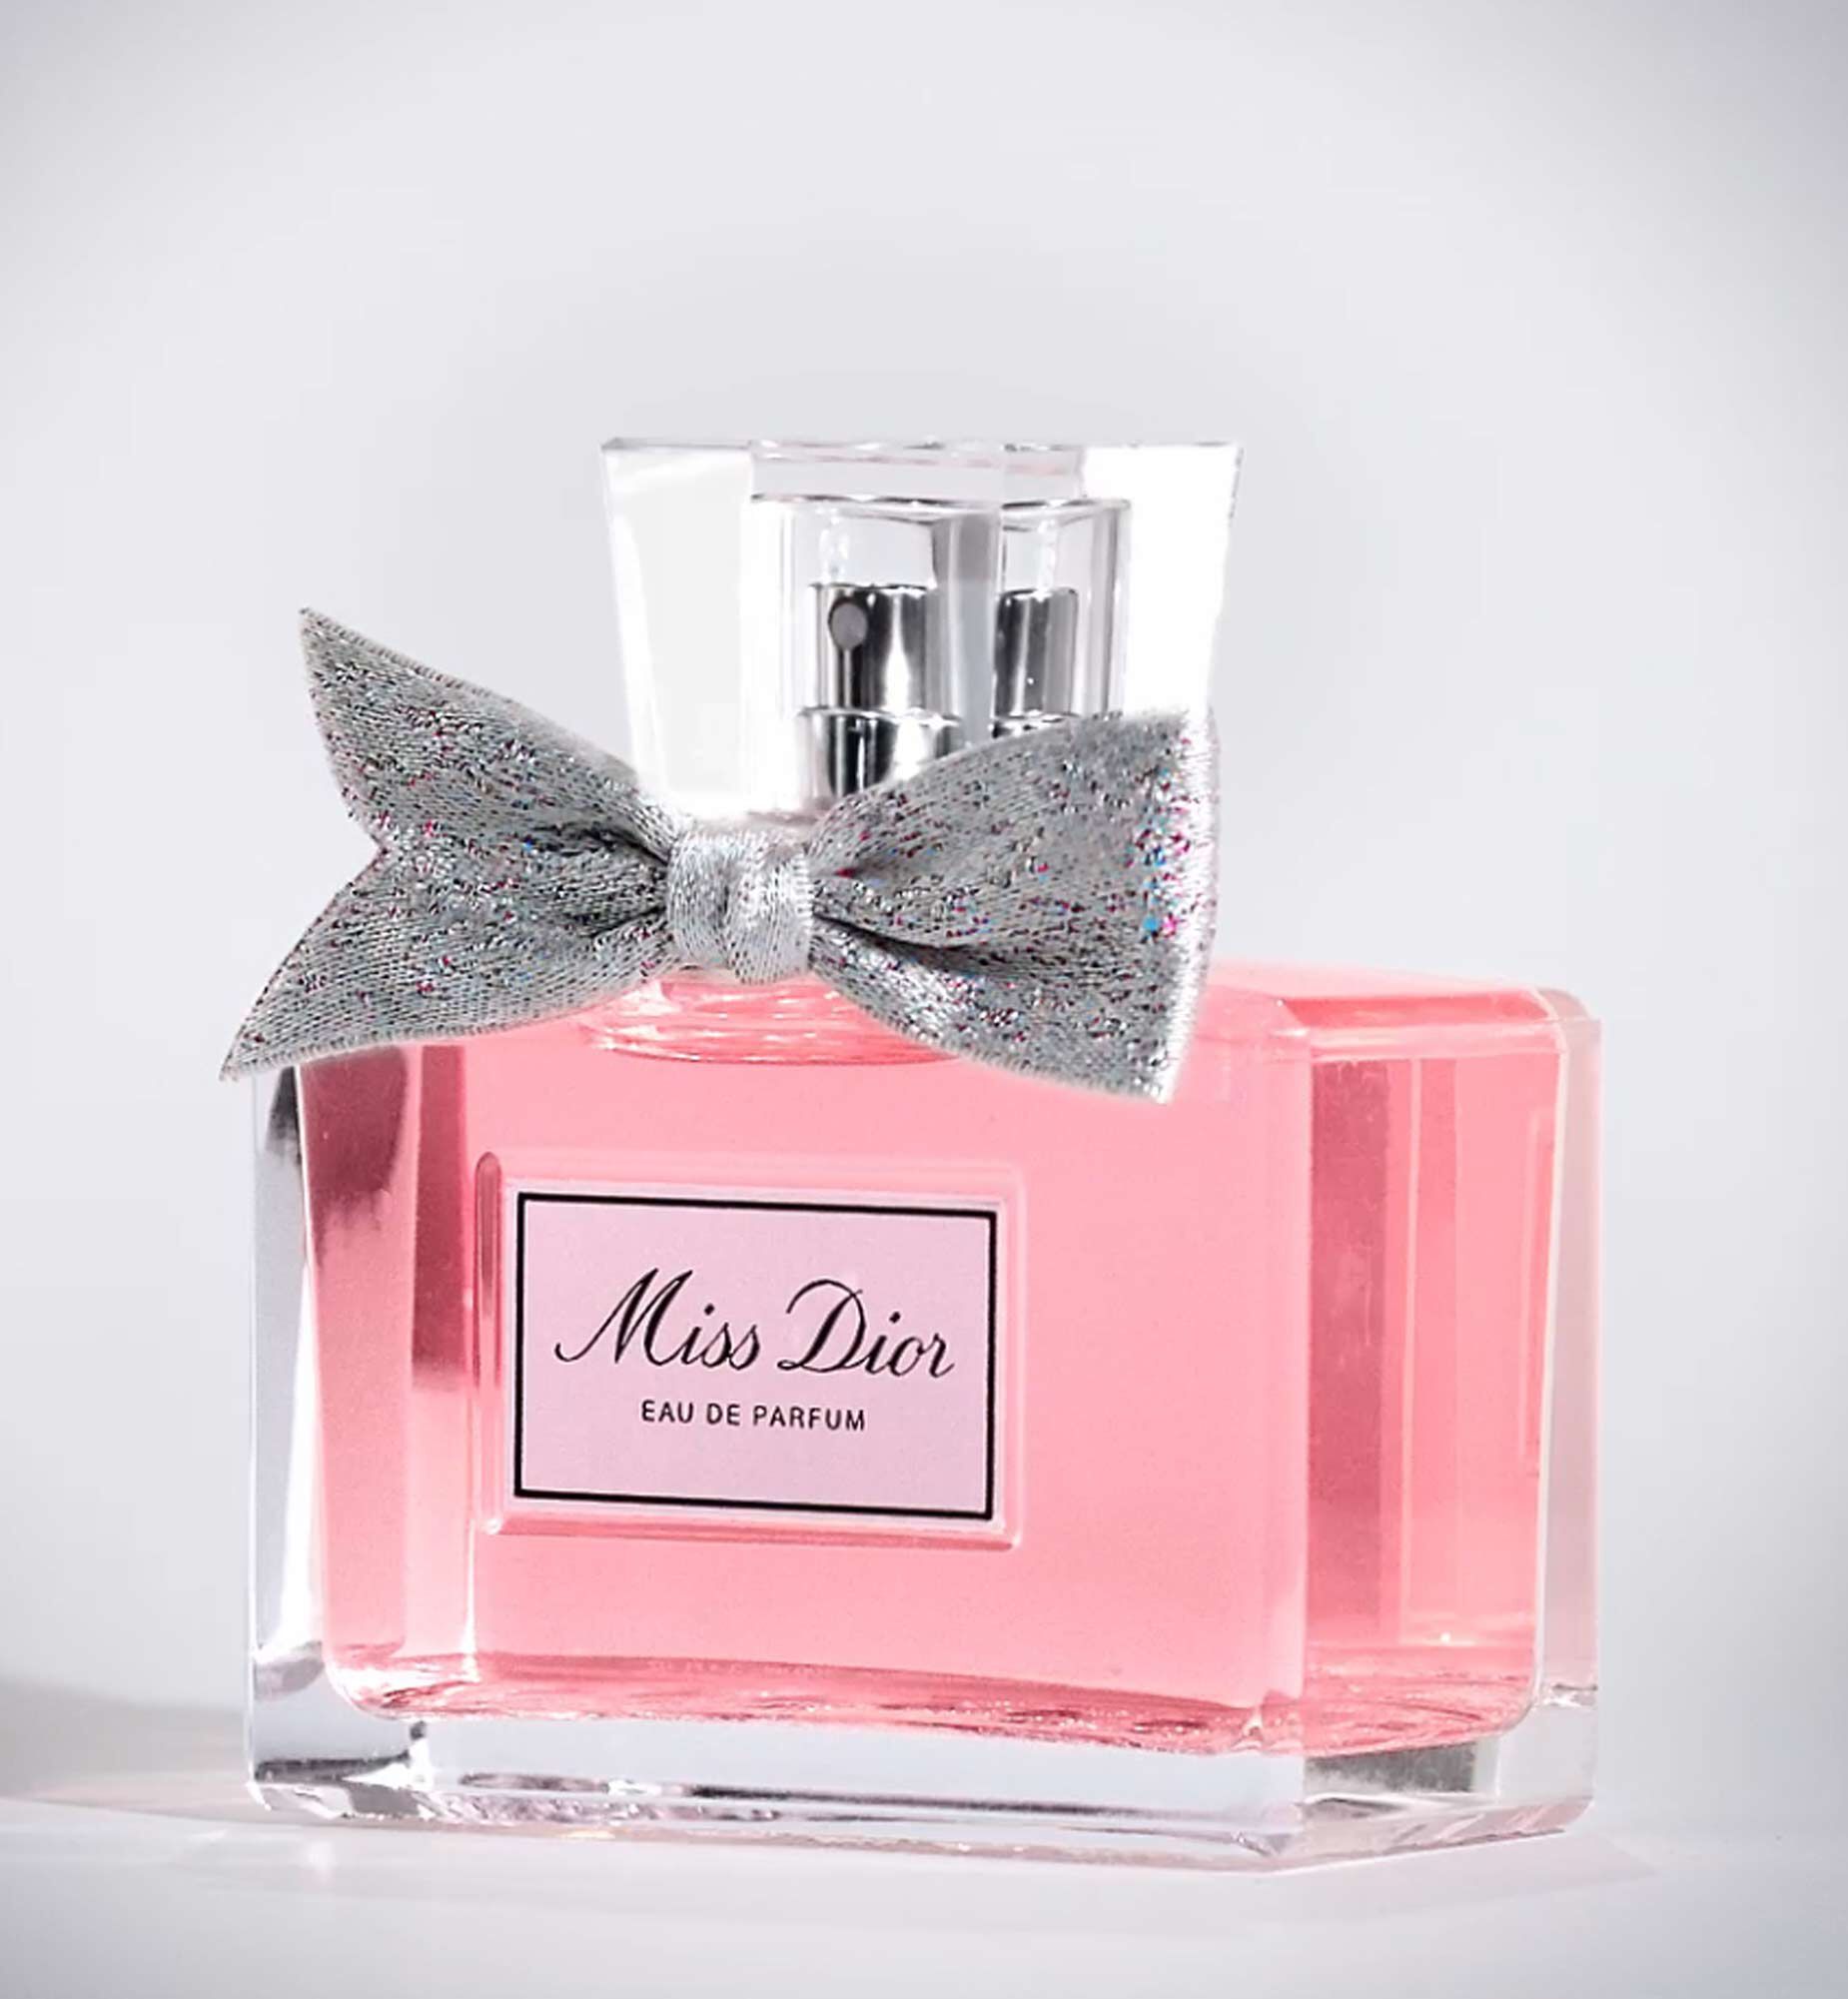 Sephora  NEW Diors latest perfume just arrived and youll LOVE it   Say hello to Miss Dior Eau de Parfum  a warm floral scent with notes of  rose  jasmine